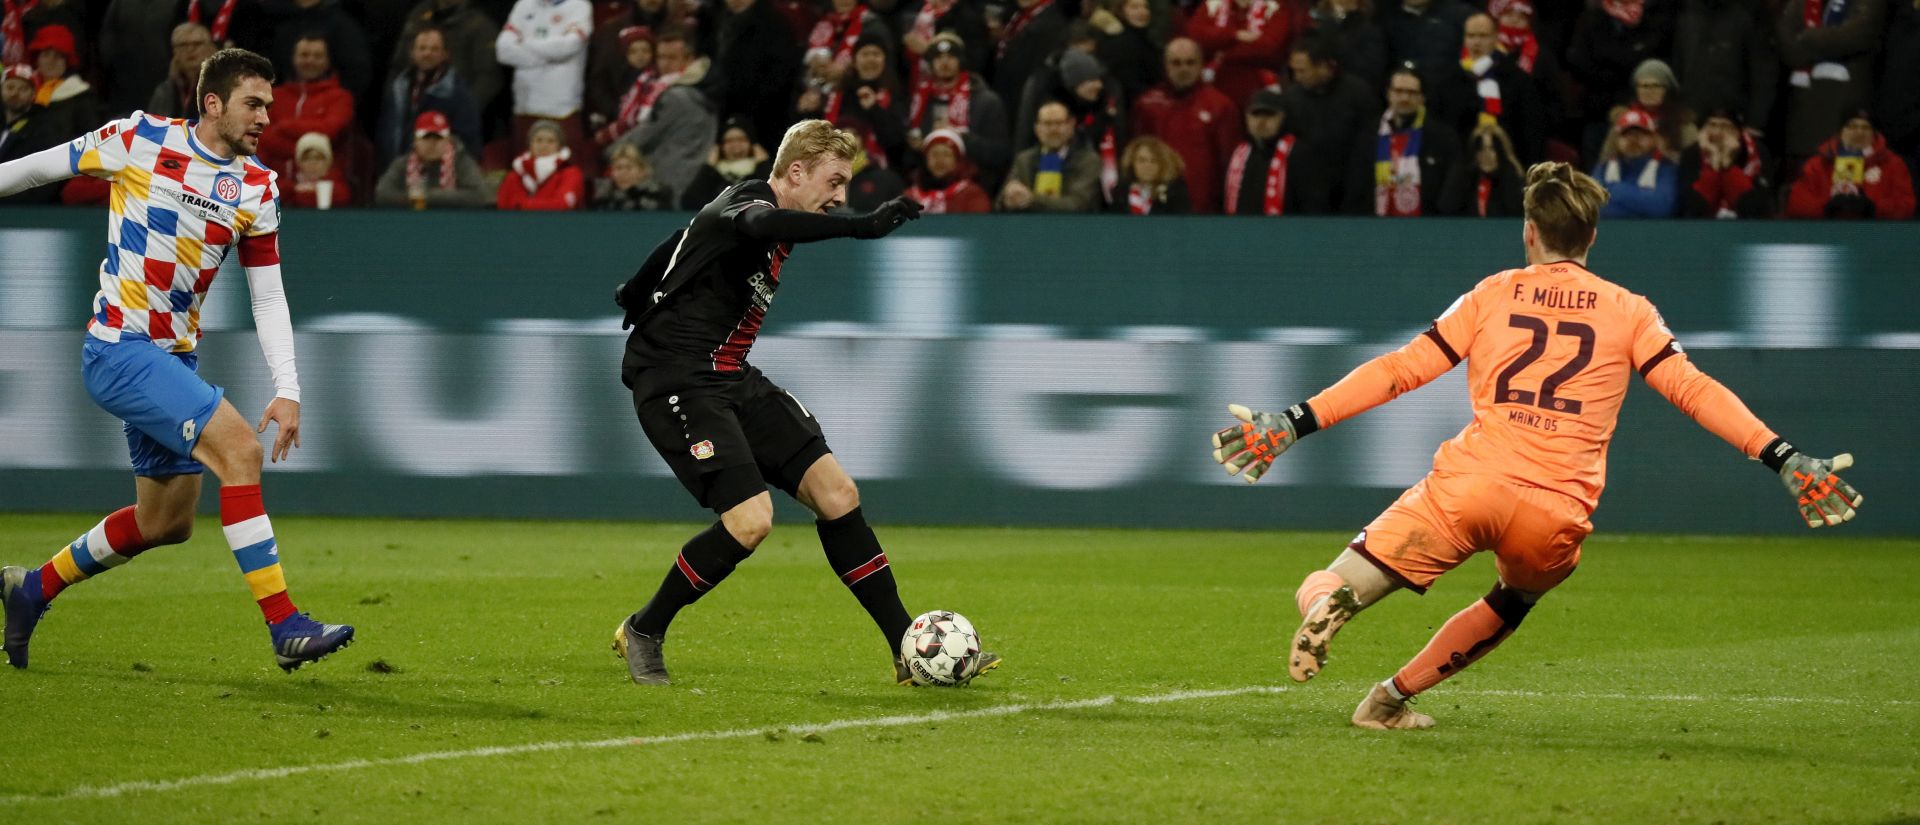 epa07353667 Leverkusen's Julian Brandt (C) scores the 3-1 lead during the German Bundesliga soccer match between 1. FSV Mainz 05 and Bayer Leverkusen in Mainz, Germany, 08 February 2019.  EPA/RONALD WITTEK CONDITIONS - ATTENTION: The DFL regulations prohibit any use of photographs as image sequences and/or quasi-video.